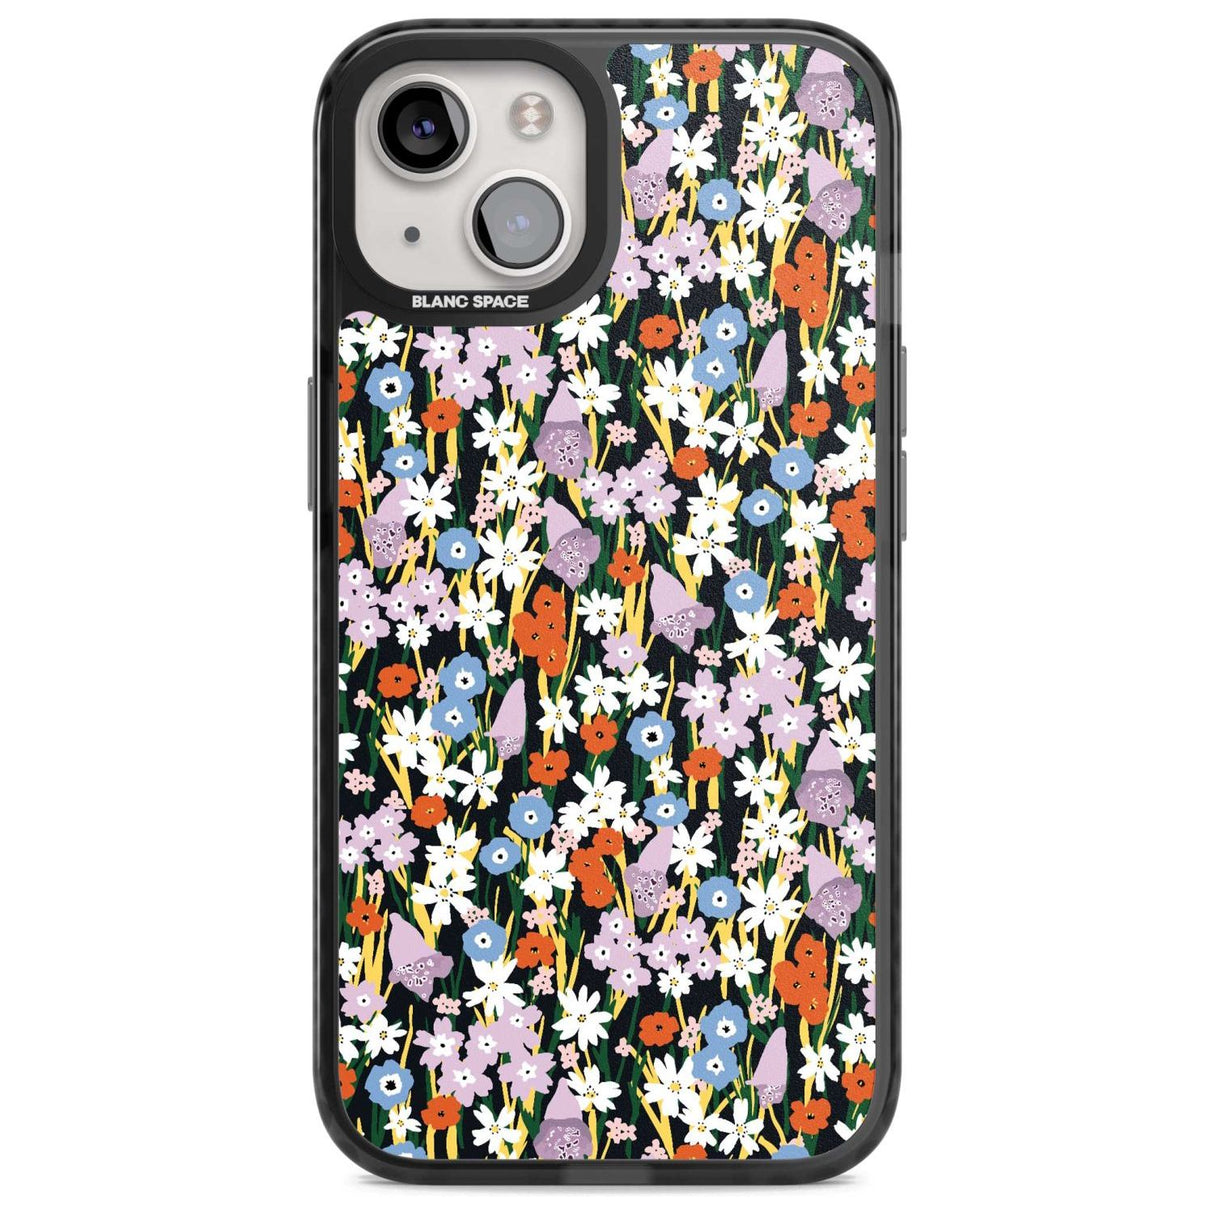 Energetic Floral Mix: Solid Phone Case iPhone 15 Plus / Magsafe Black Impact Case,iPhone 15 / Magsafe Black Impact Case,iPhone 14 Plus / Magsafe Black Impact Case,iPhone 14 / Magsafe Black Impact Case,iPhone 13 / Magsafe Black Impact Case Blanc Space